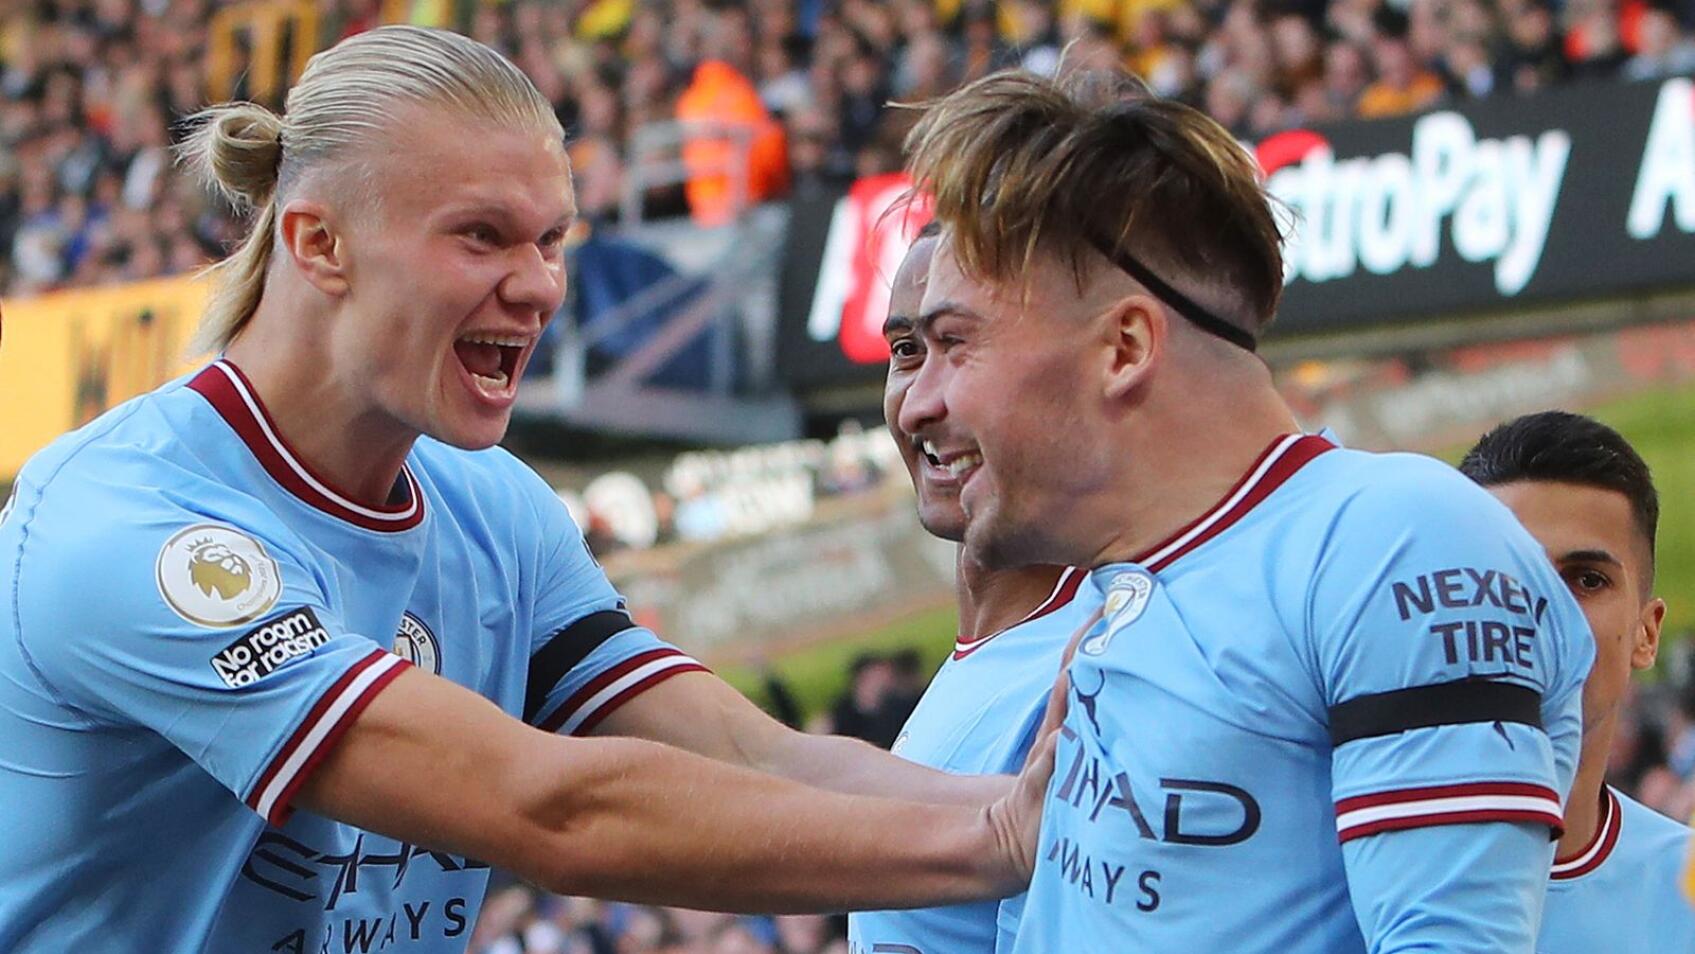 Manchester City's Jack Grealish celebrates with teammates after scoring the opening goal during their Premier League game against Wolverhampton Wanderers at Molineux Stadium in Wolverhampton on Saturday